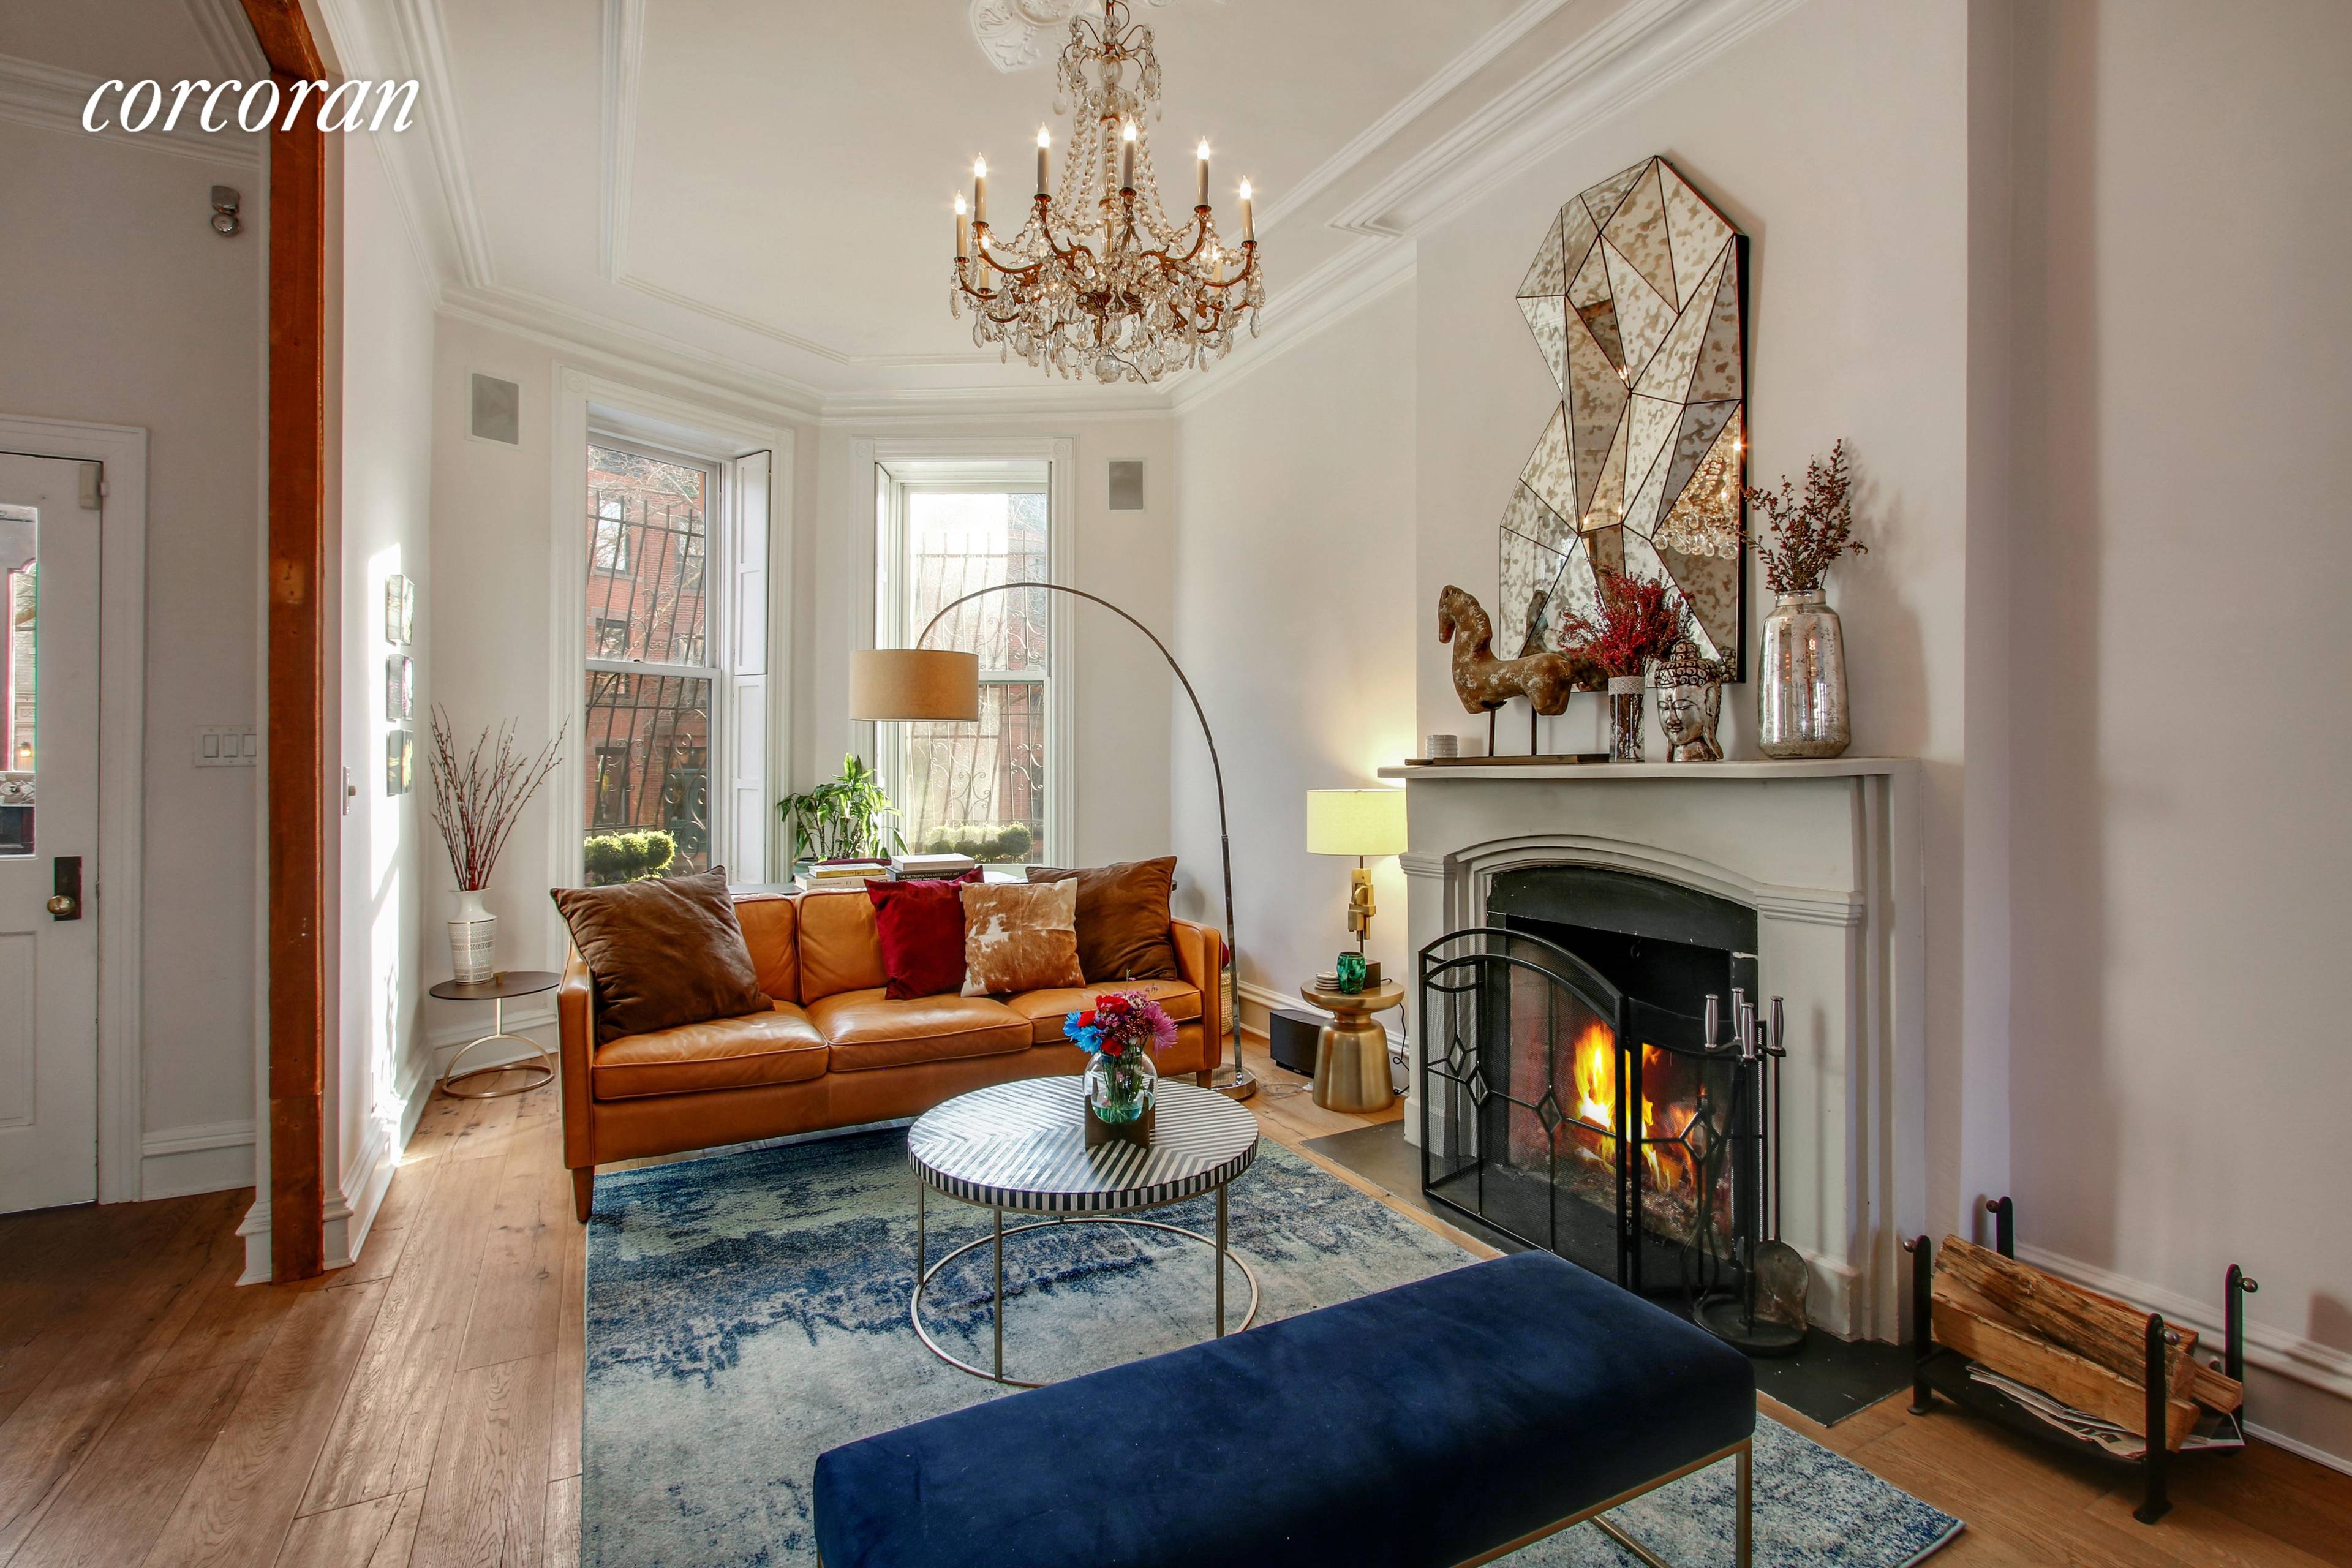 Centrally located in the heart of Park Slope, this beautifully updated, upper duplex features a nice blend of modern finishes and traditional charm throughout.